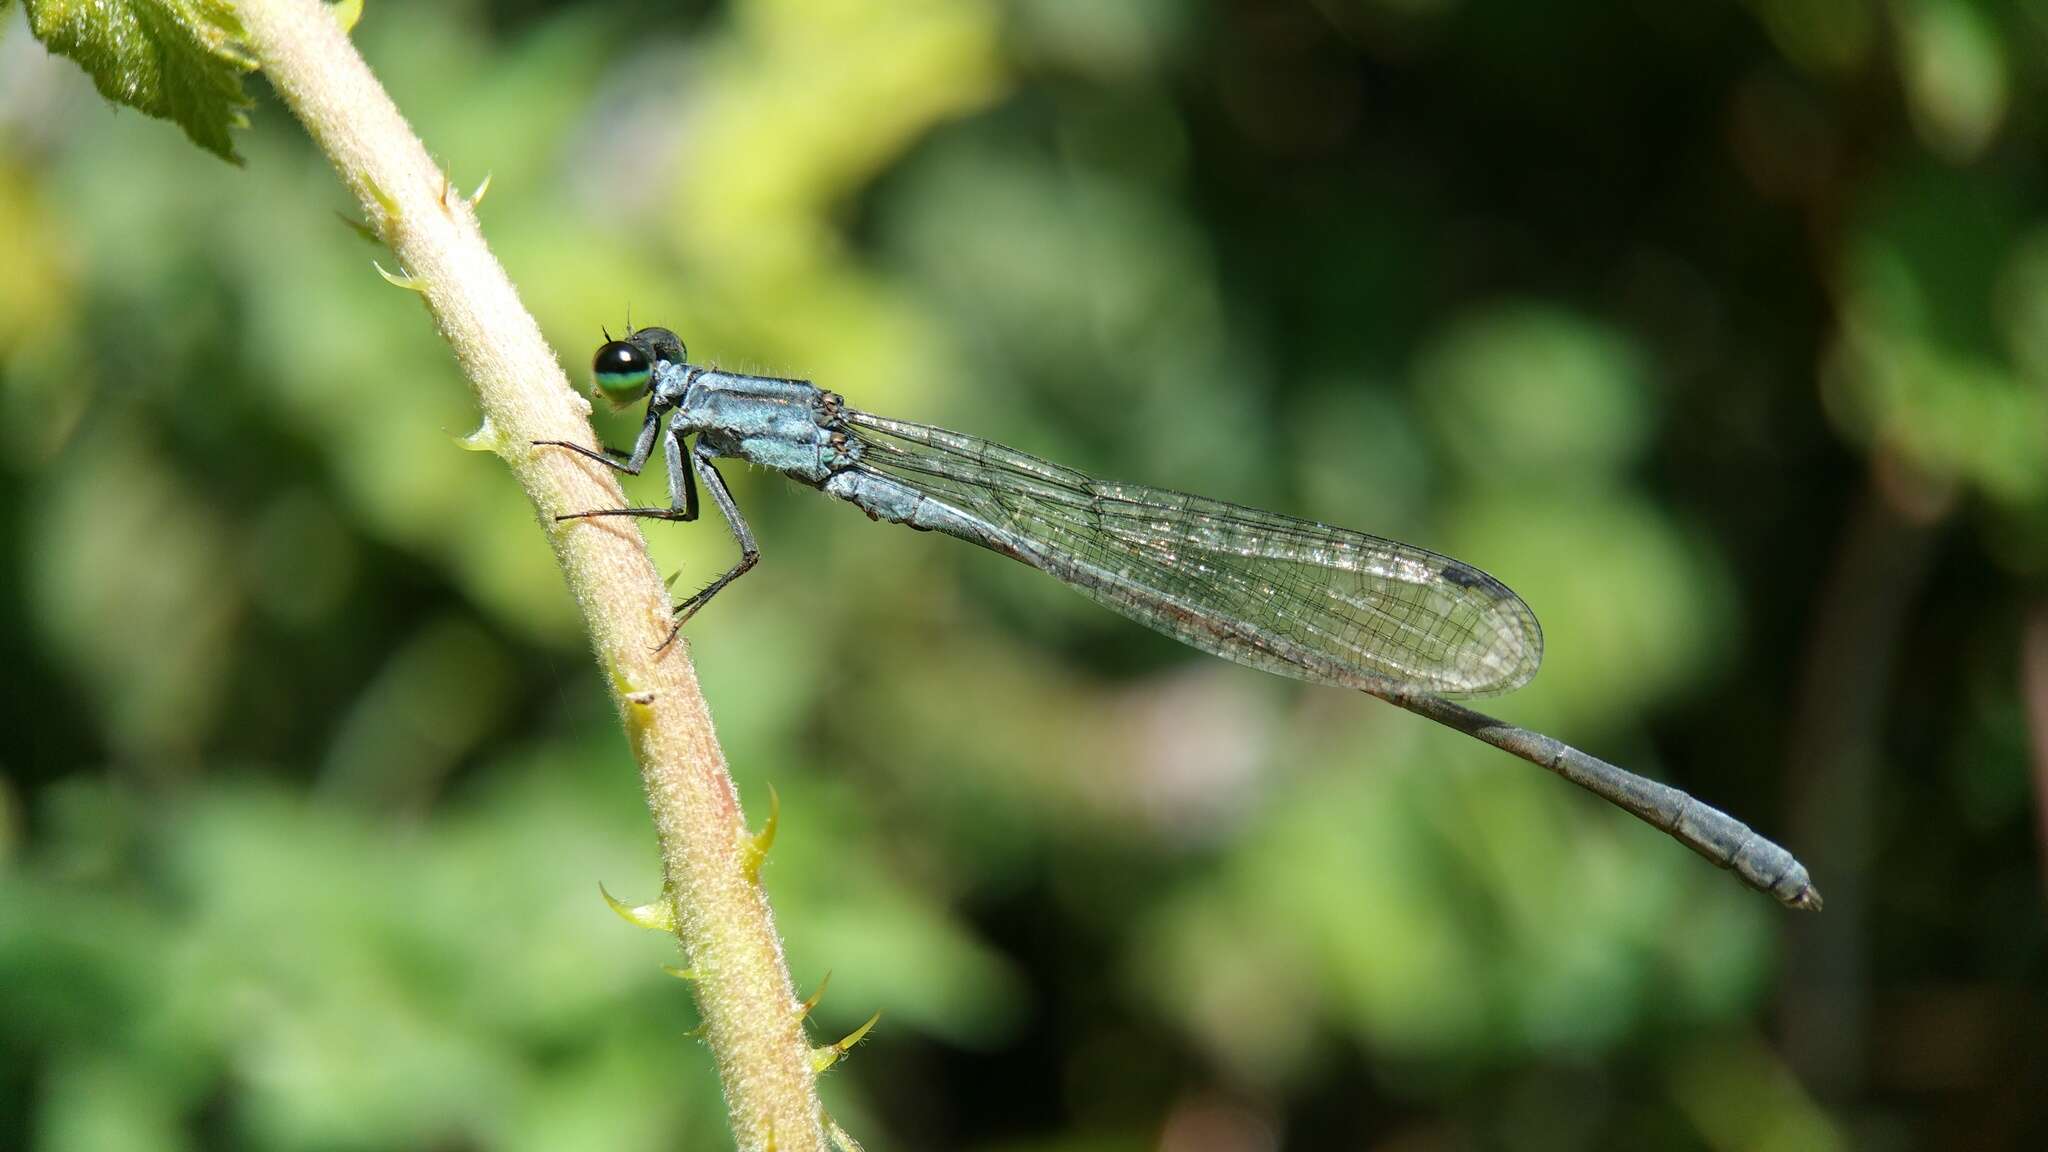 Image of Pseudagrion syriacum Selys 1887